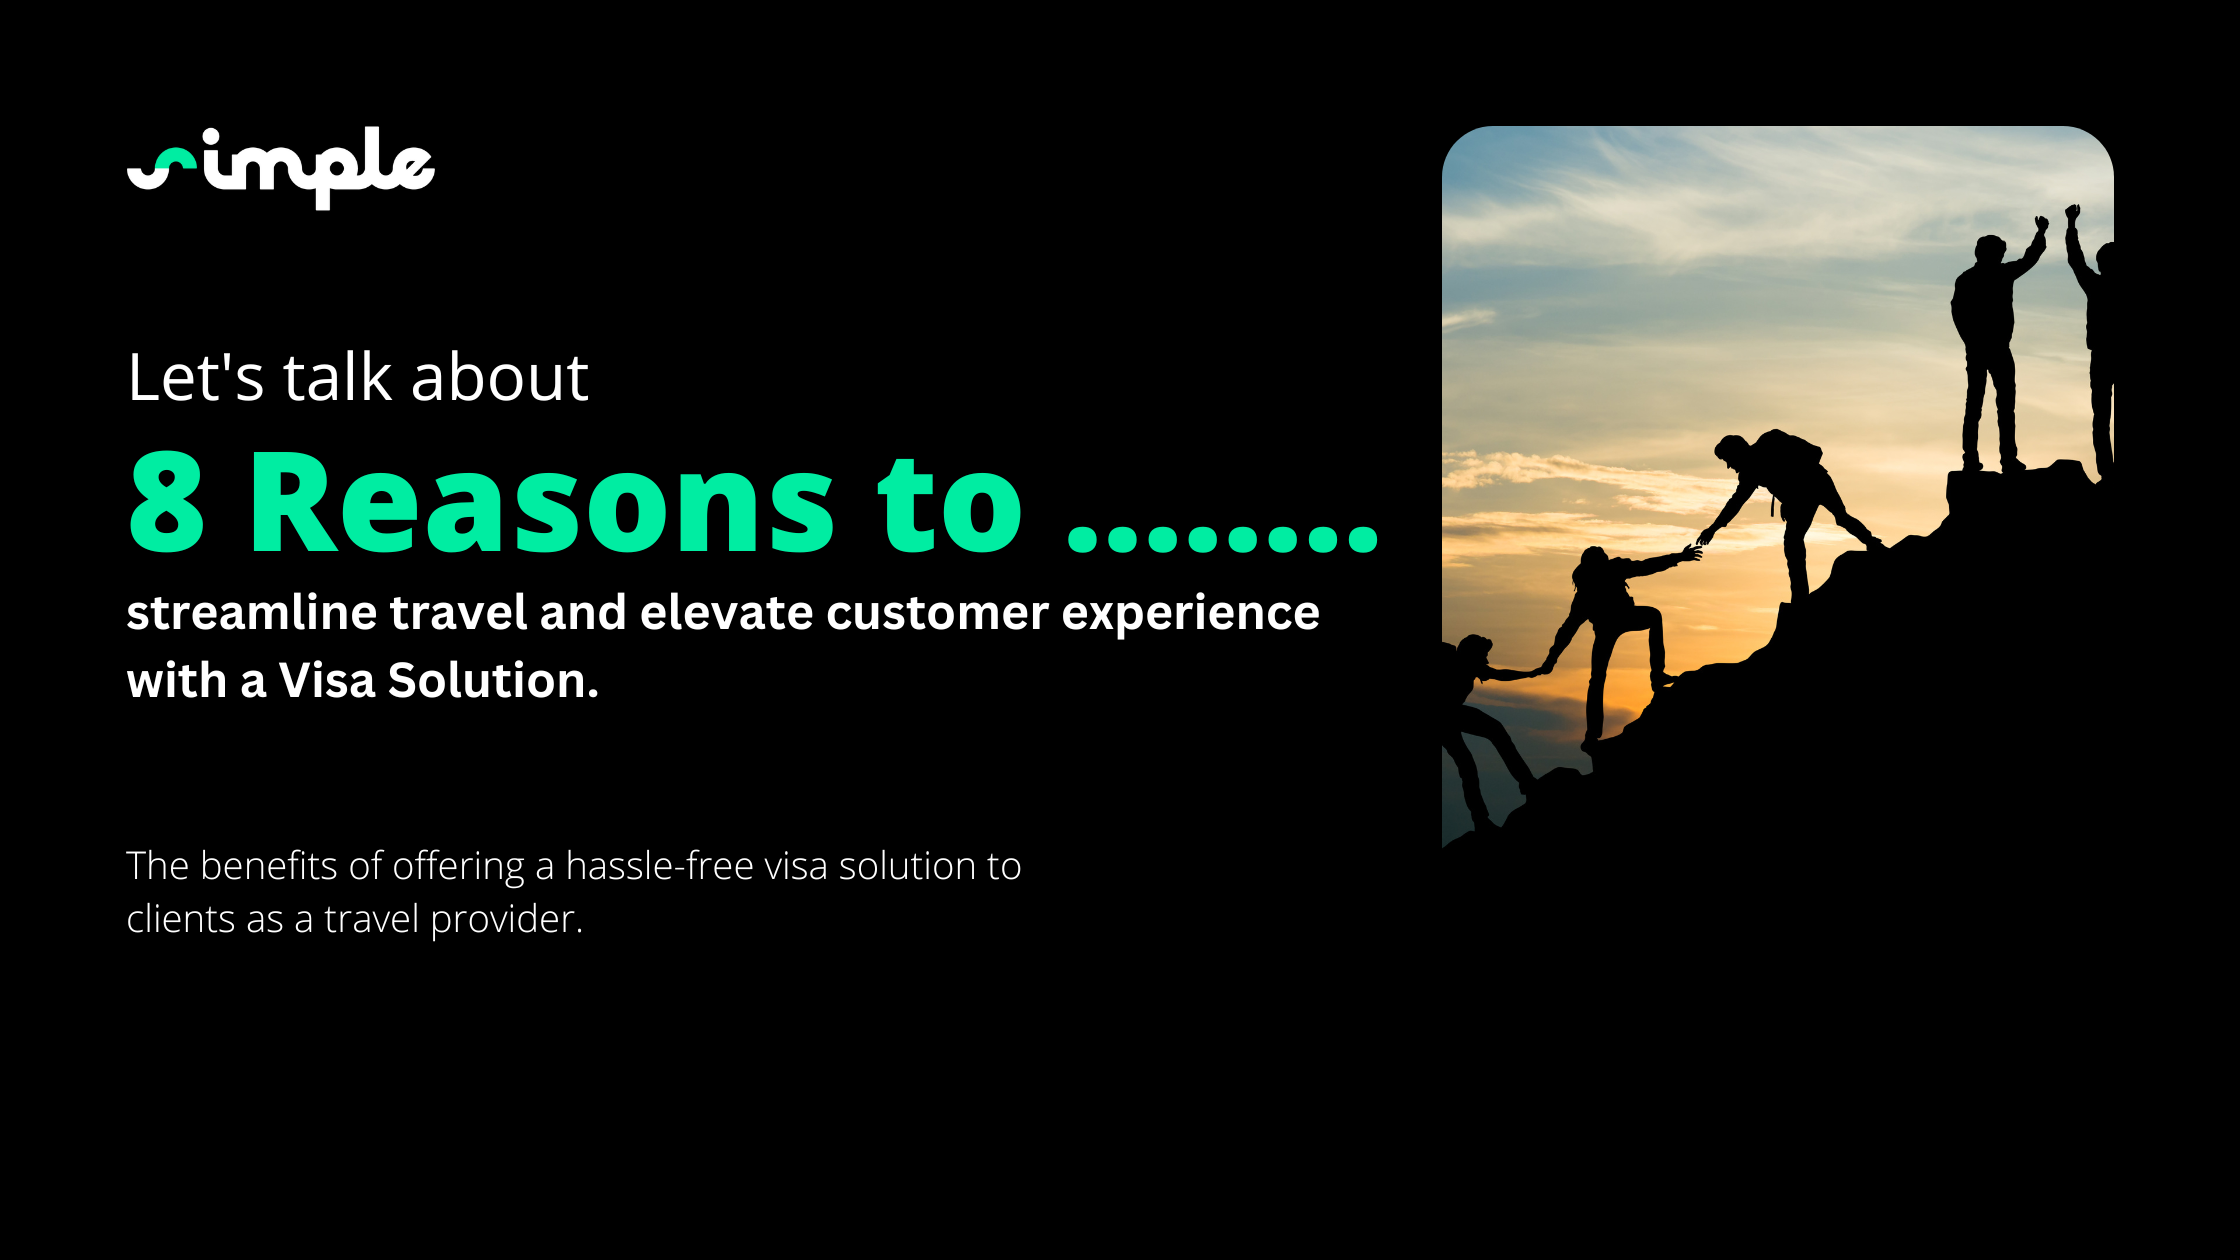 8 reasons to streamline travel and elevate customer experience with a Visa Solution